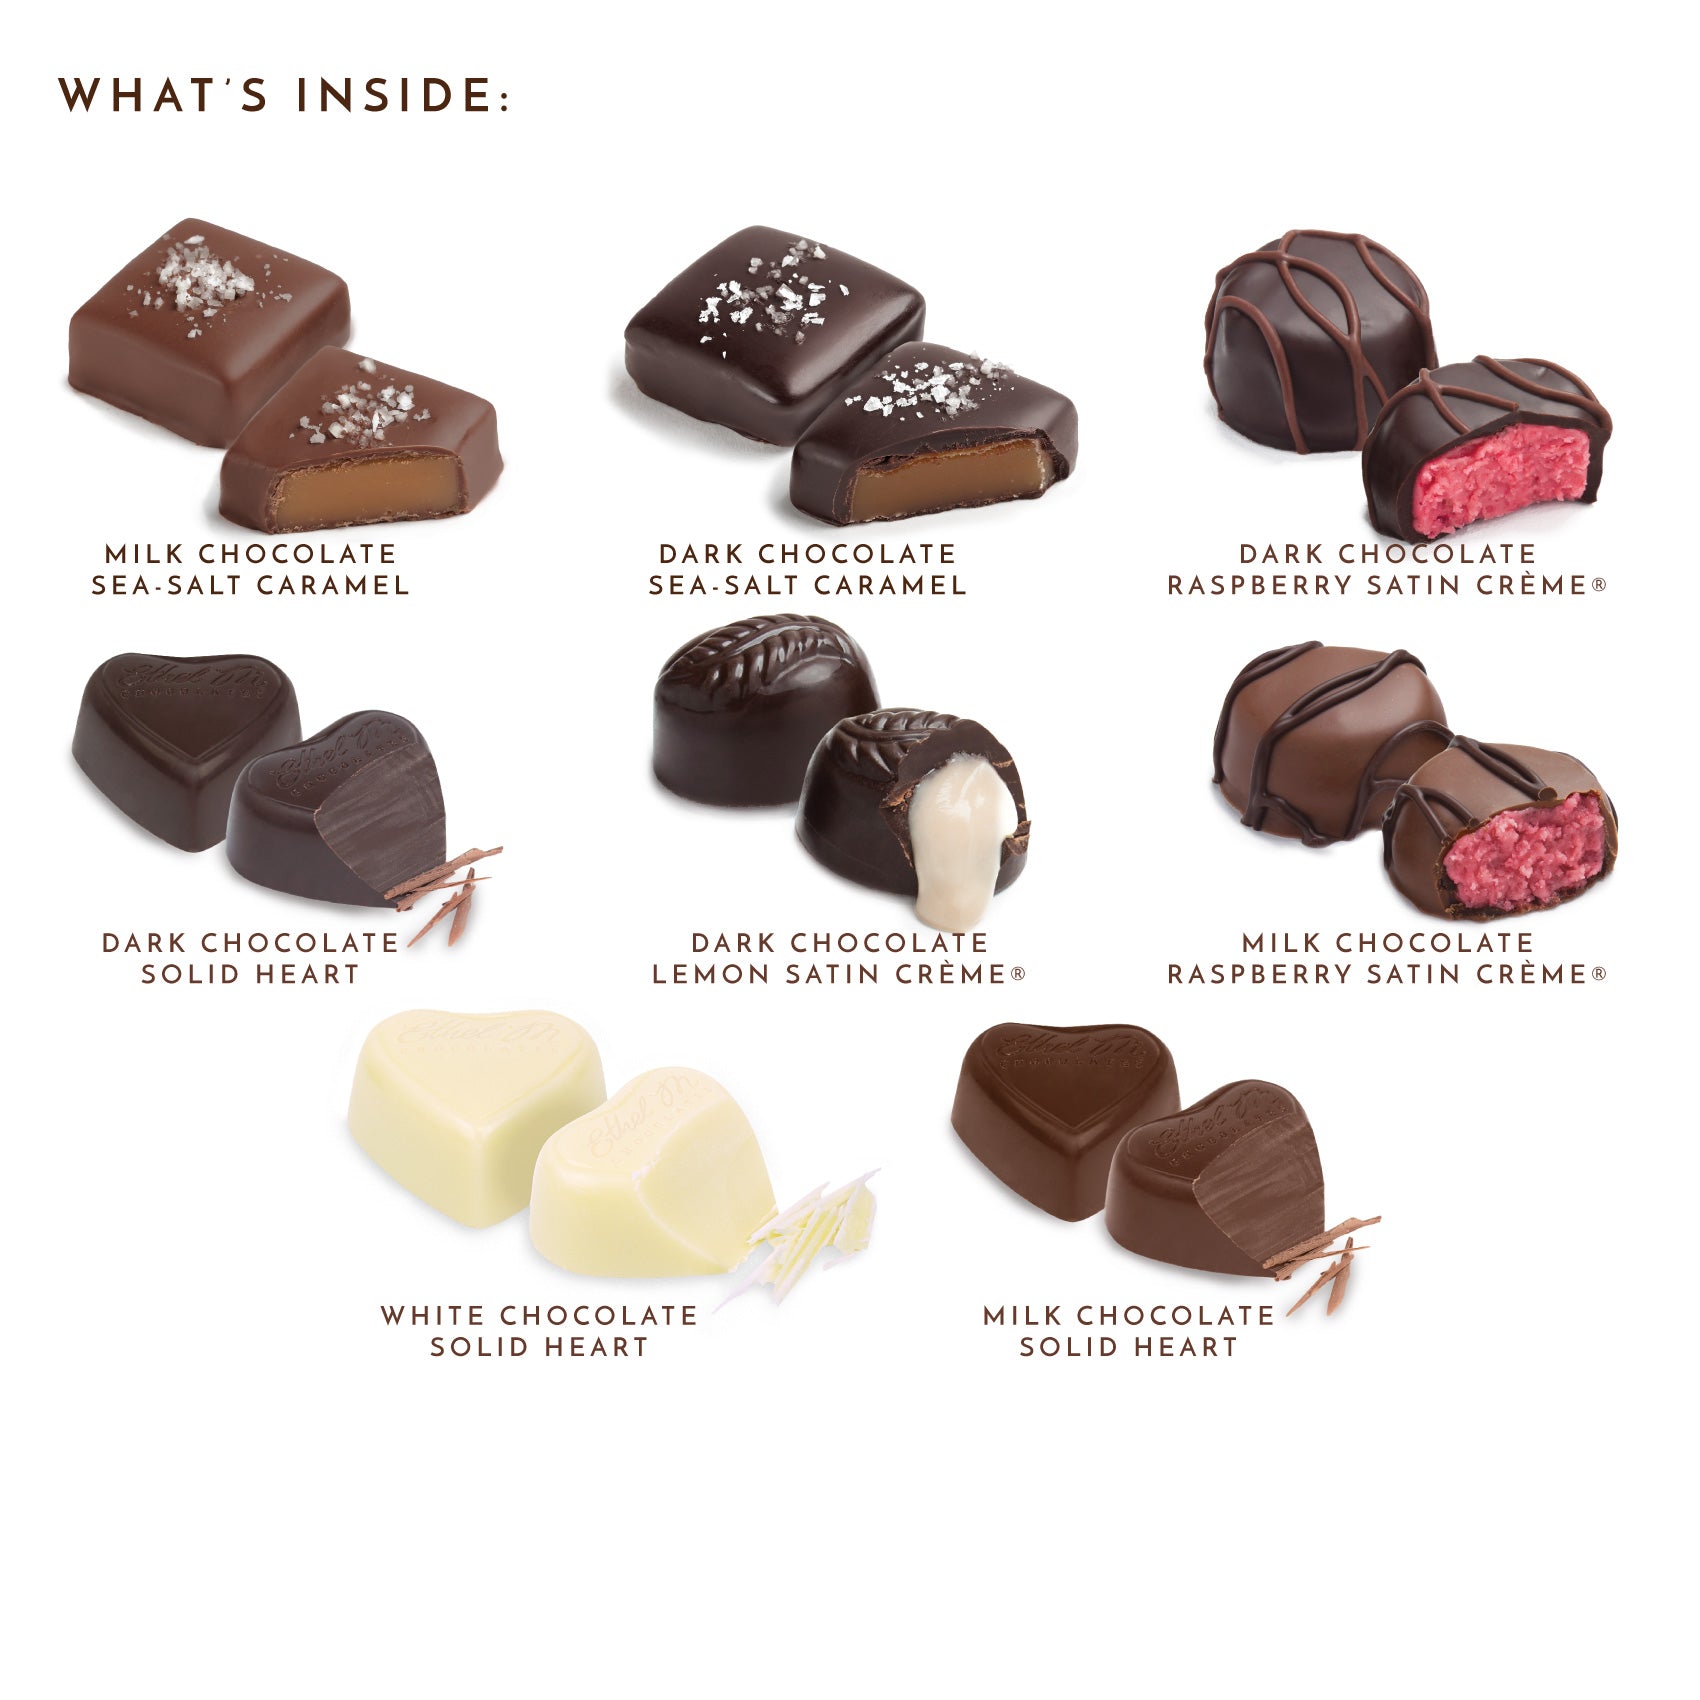 Ethel M Valentine's Day Small Heart Chocolate Gift Box - What's Inside - Please call 1-800-438-4356 for more information